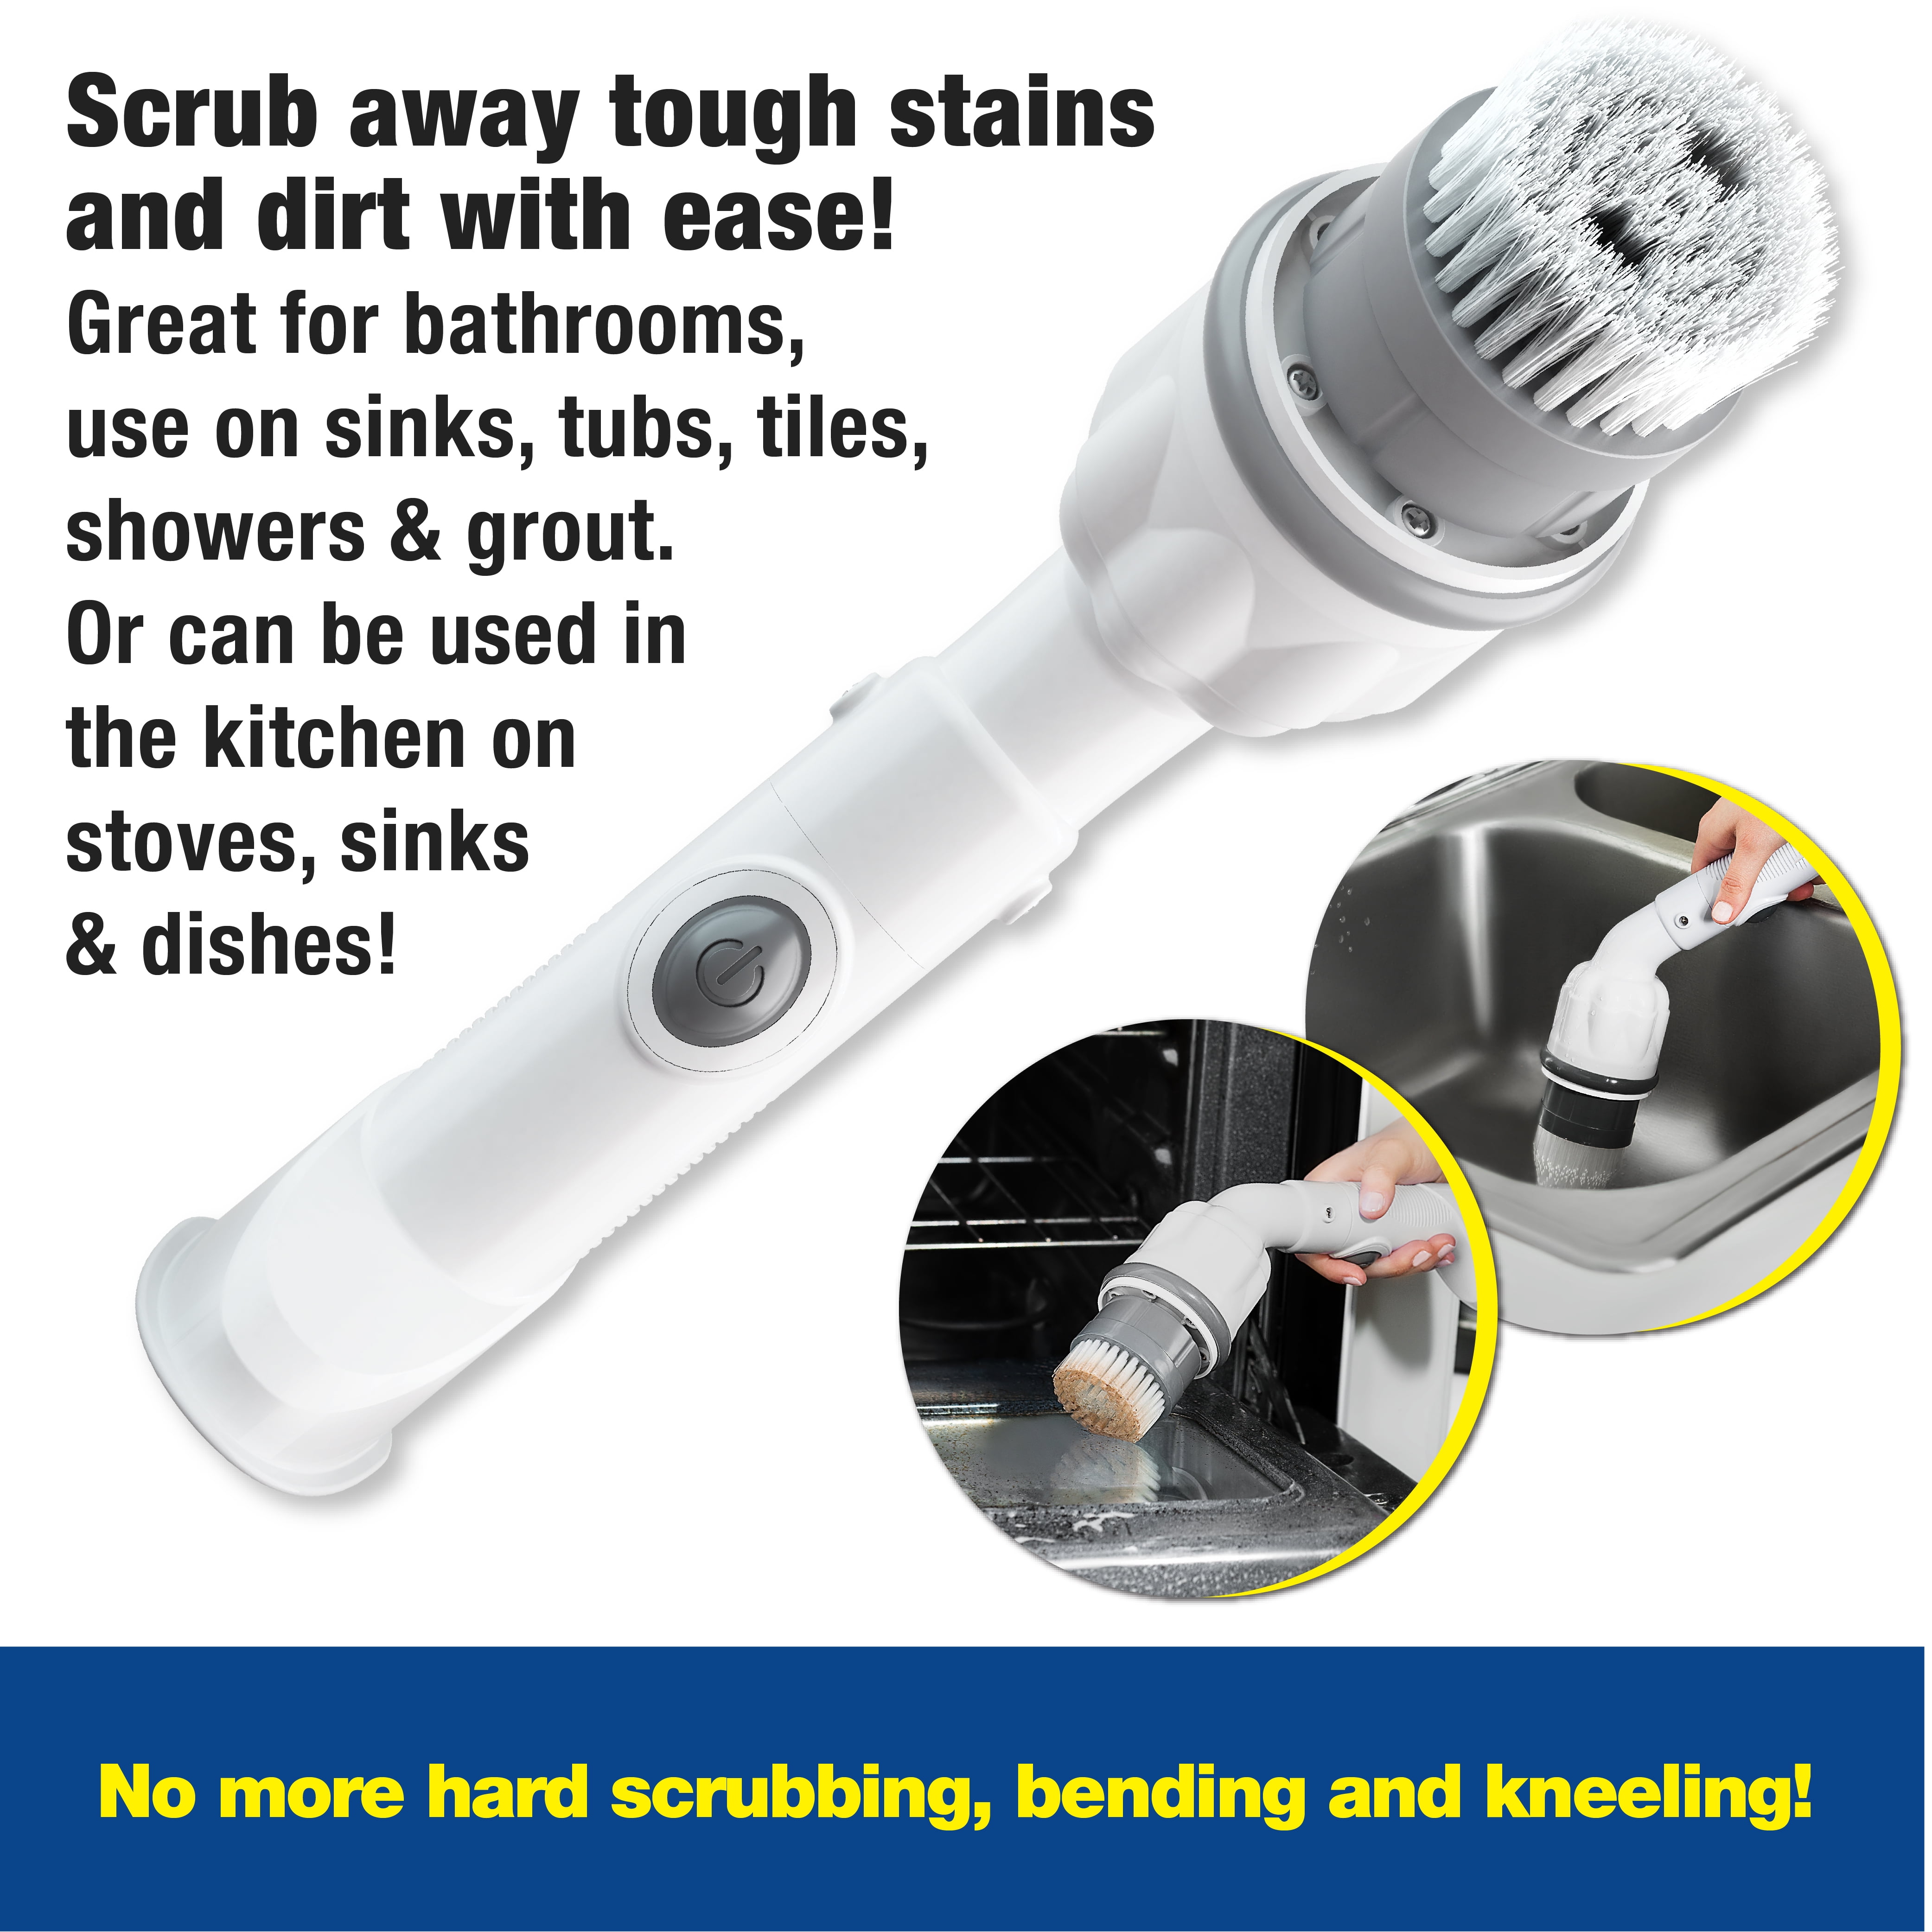 Bell + Howell Scrubtastic 39 in. Multi-Purpose Surface Rechargeable Power  Scrubber Cleaner Scrub Brush with 3 Brush Heads 8048 - The Home Depot